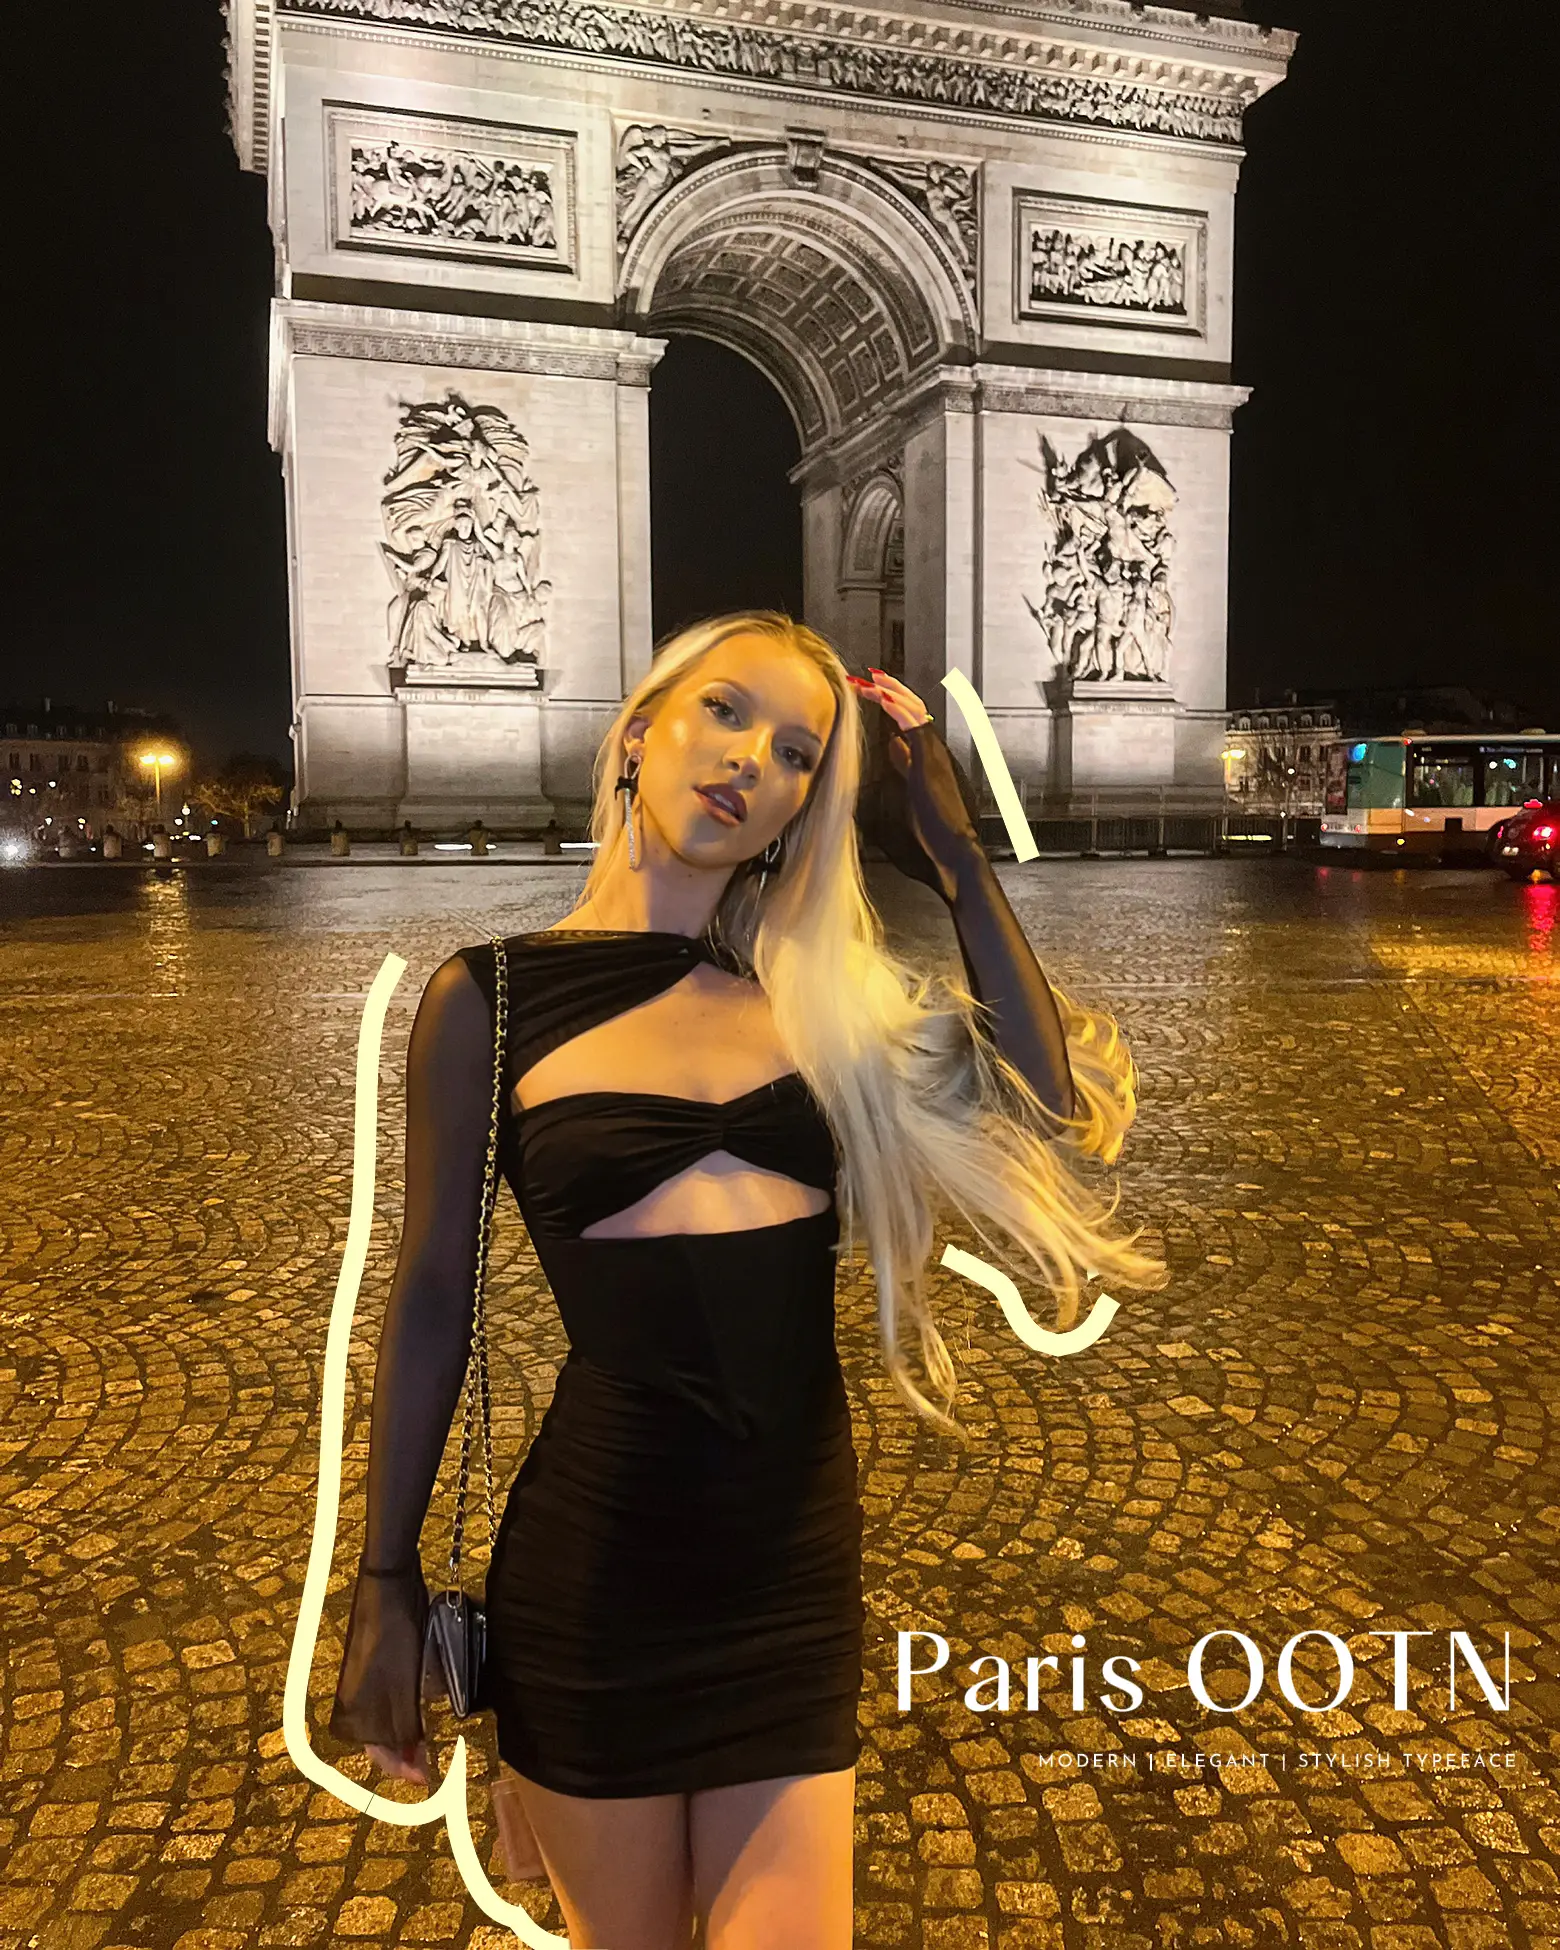 INSTA PIC IDEAS WHEN IN PARIS🇫🇷, Gallery posted by Marilyn Leadens